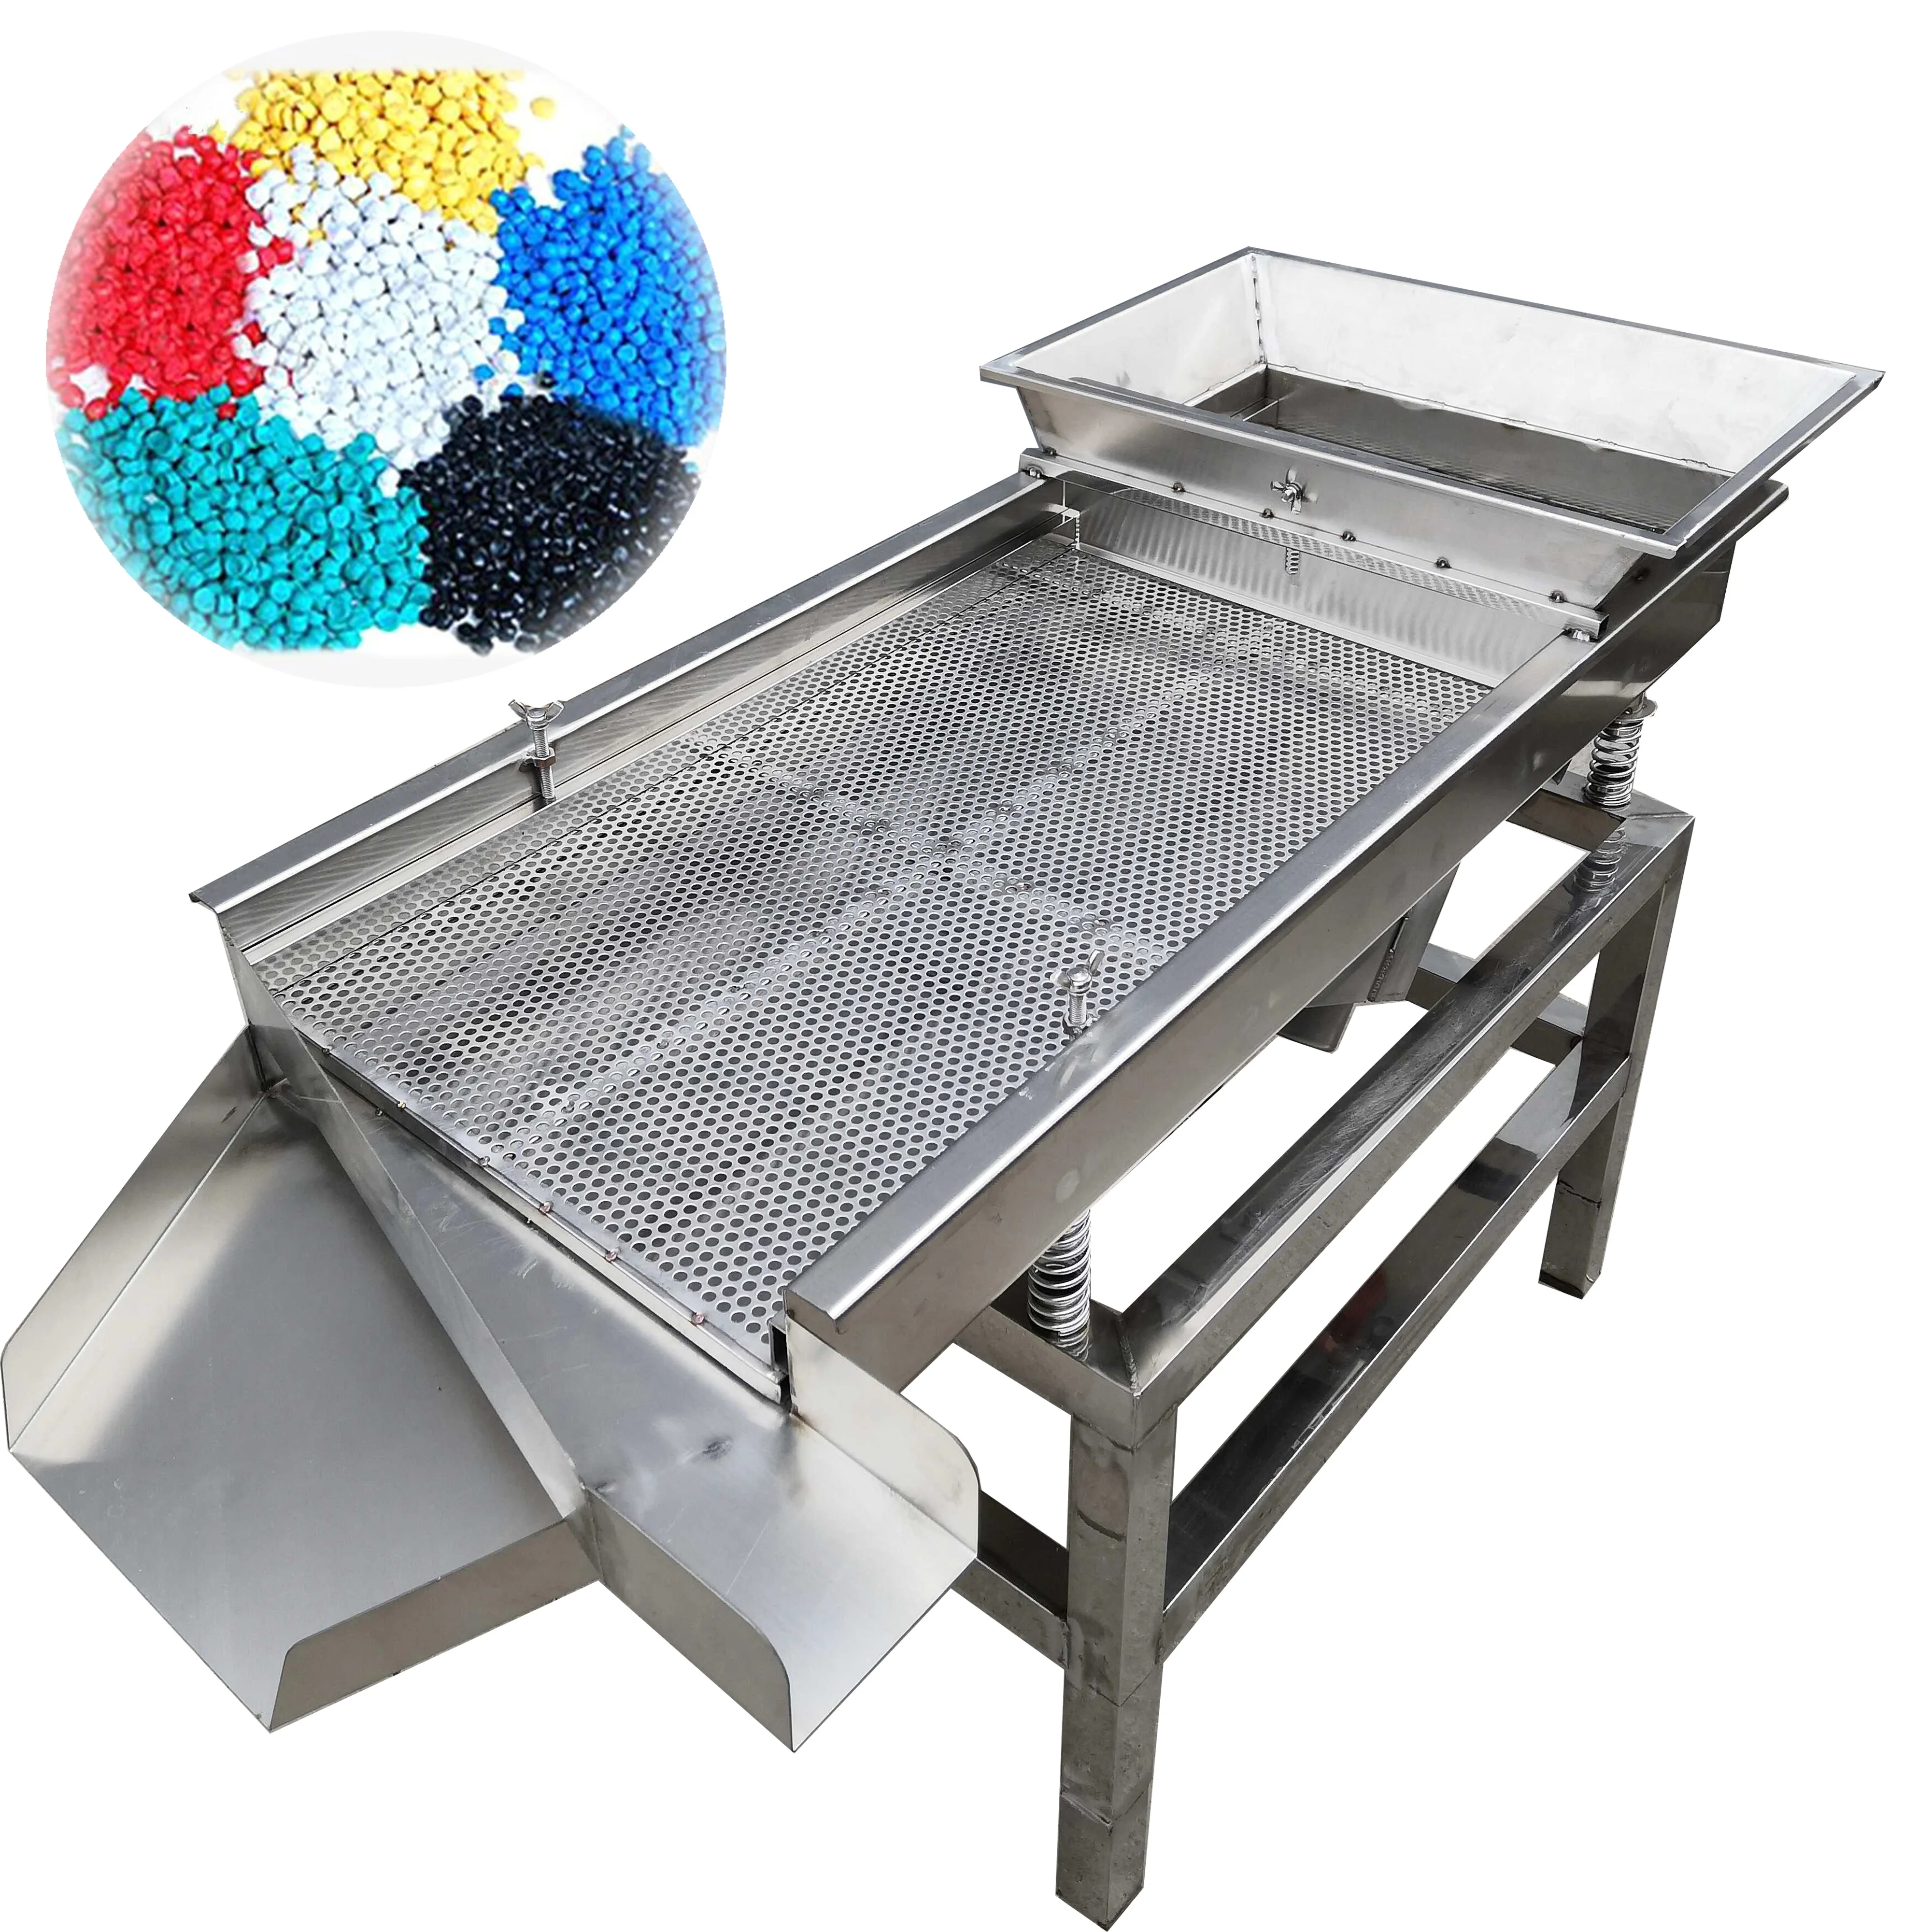 

Vibrating Screen Sieve Powder Machine Stainless Steel Small Electric Sieve FIlter Medicine Powder Vibration Screening Machine